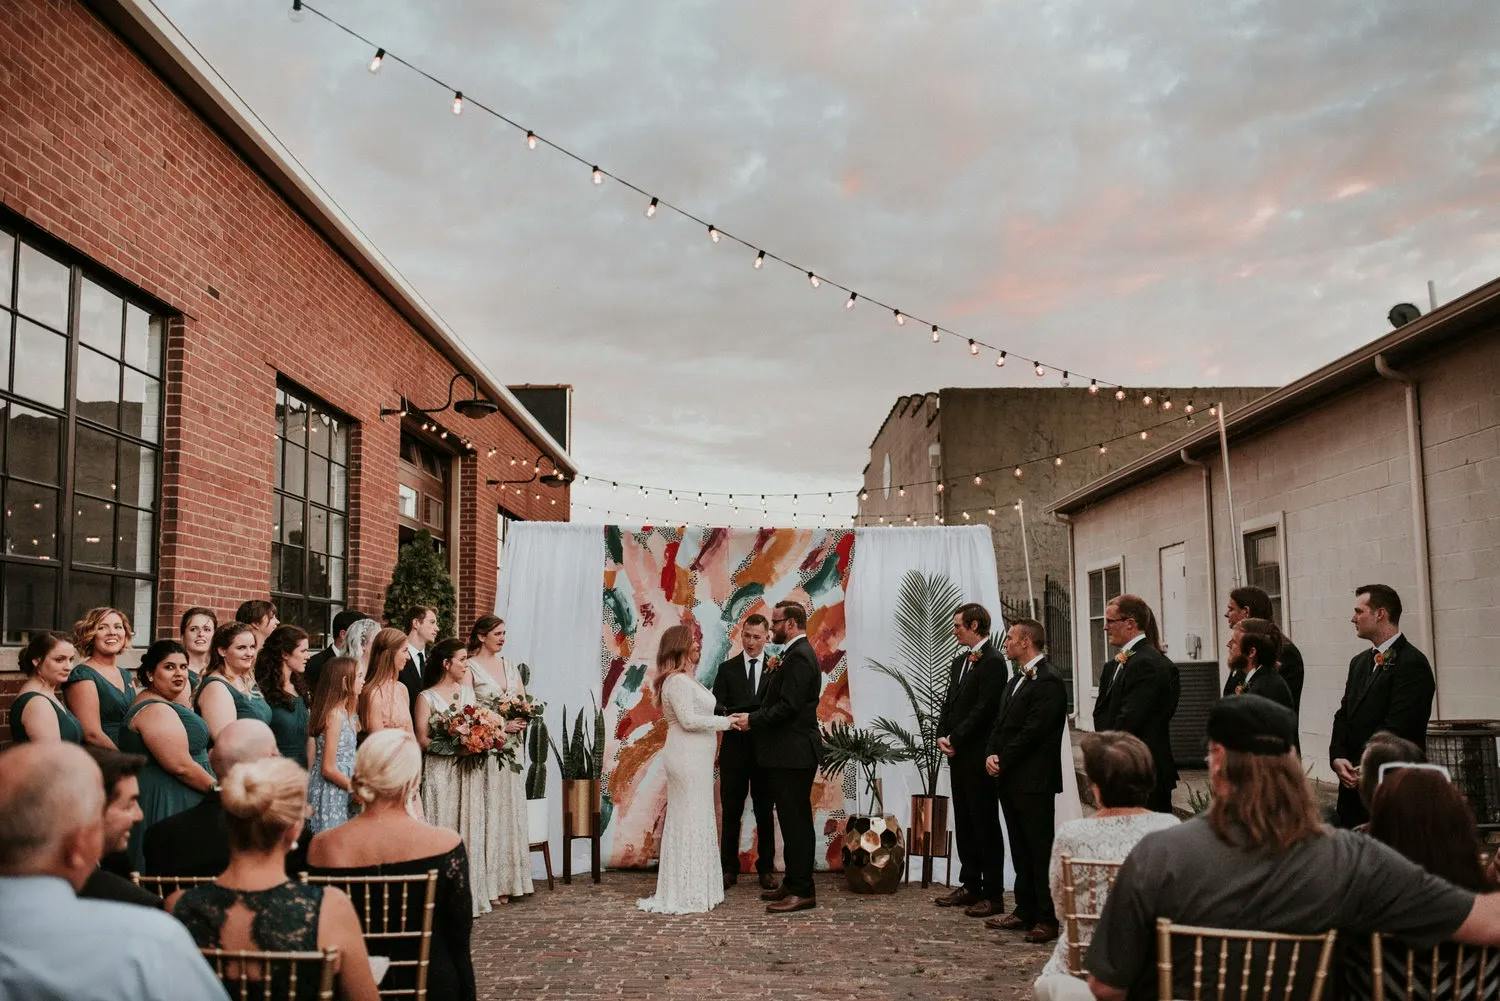 A couple stands facing each other under a colorful abstract backdrop during an outdoor wedding ceremony. They are surrounded by their wedding party, guests in chairs, with string lights overhead. The scene is set between two brick and white buildings at sunset.